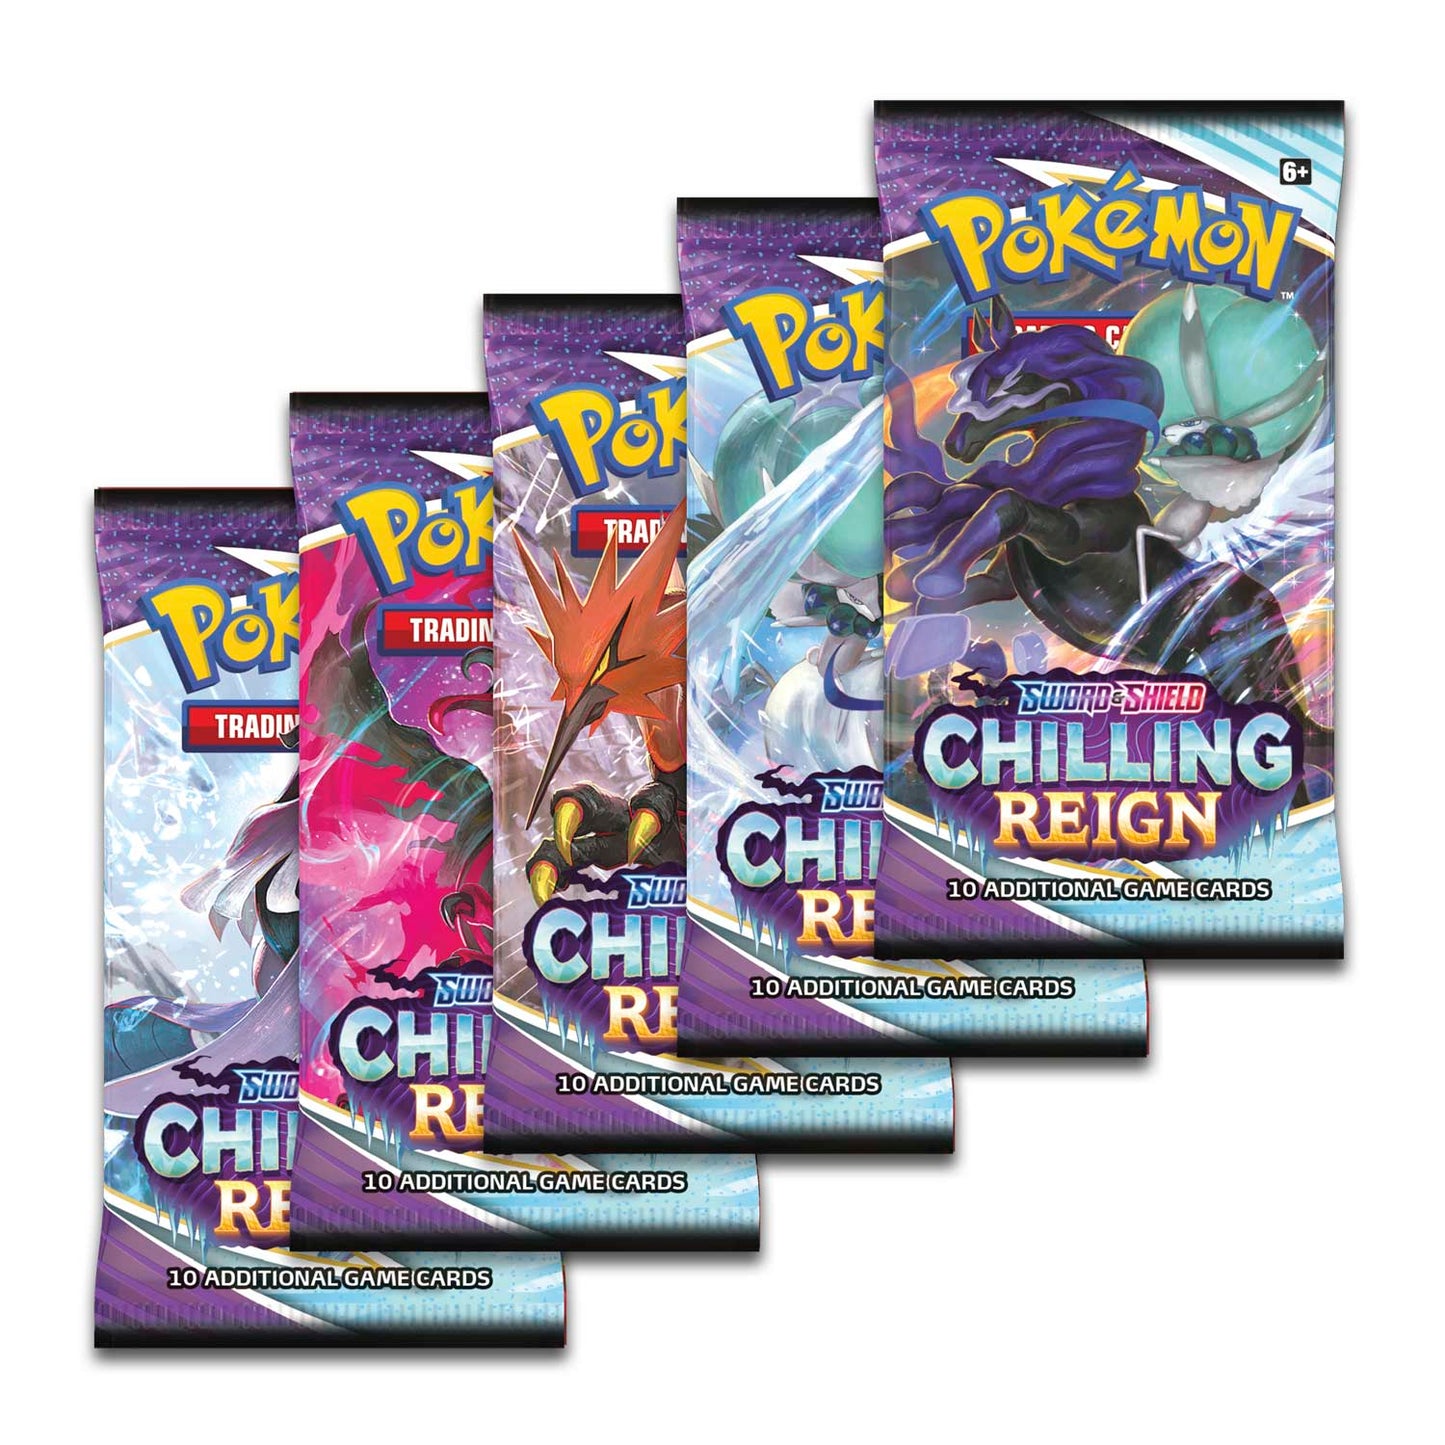 Pokémon Booster Pack S&S Chilling Reign Official Factory Sealed